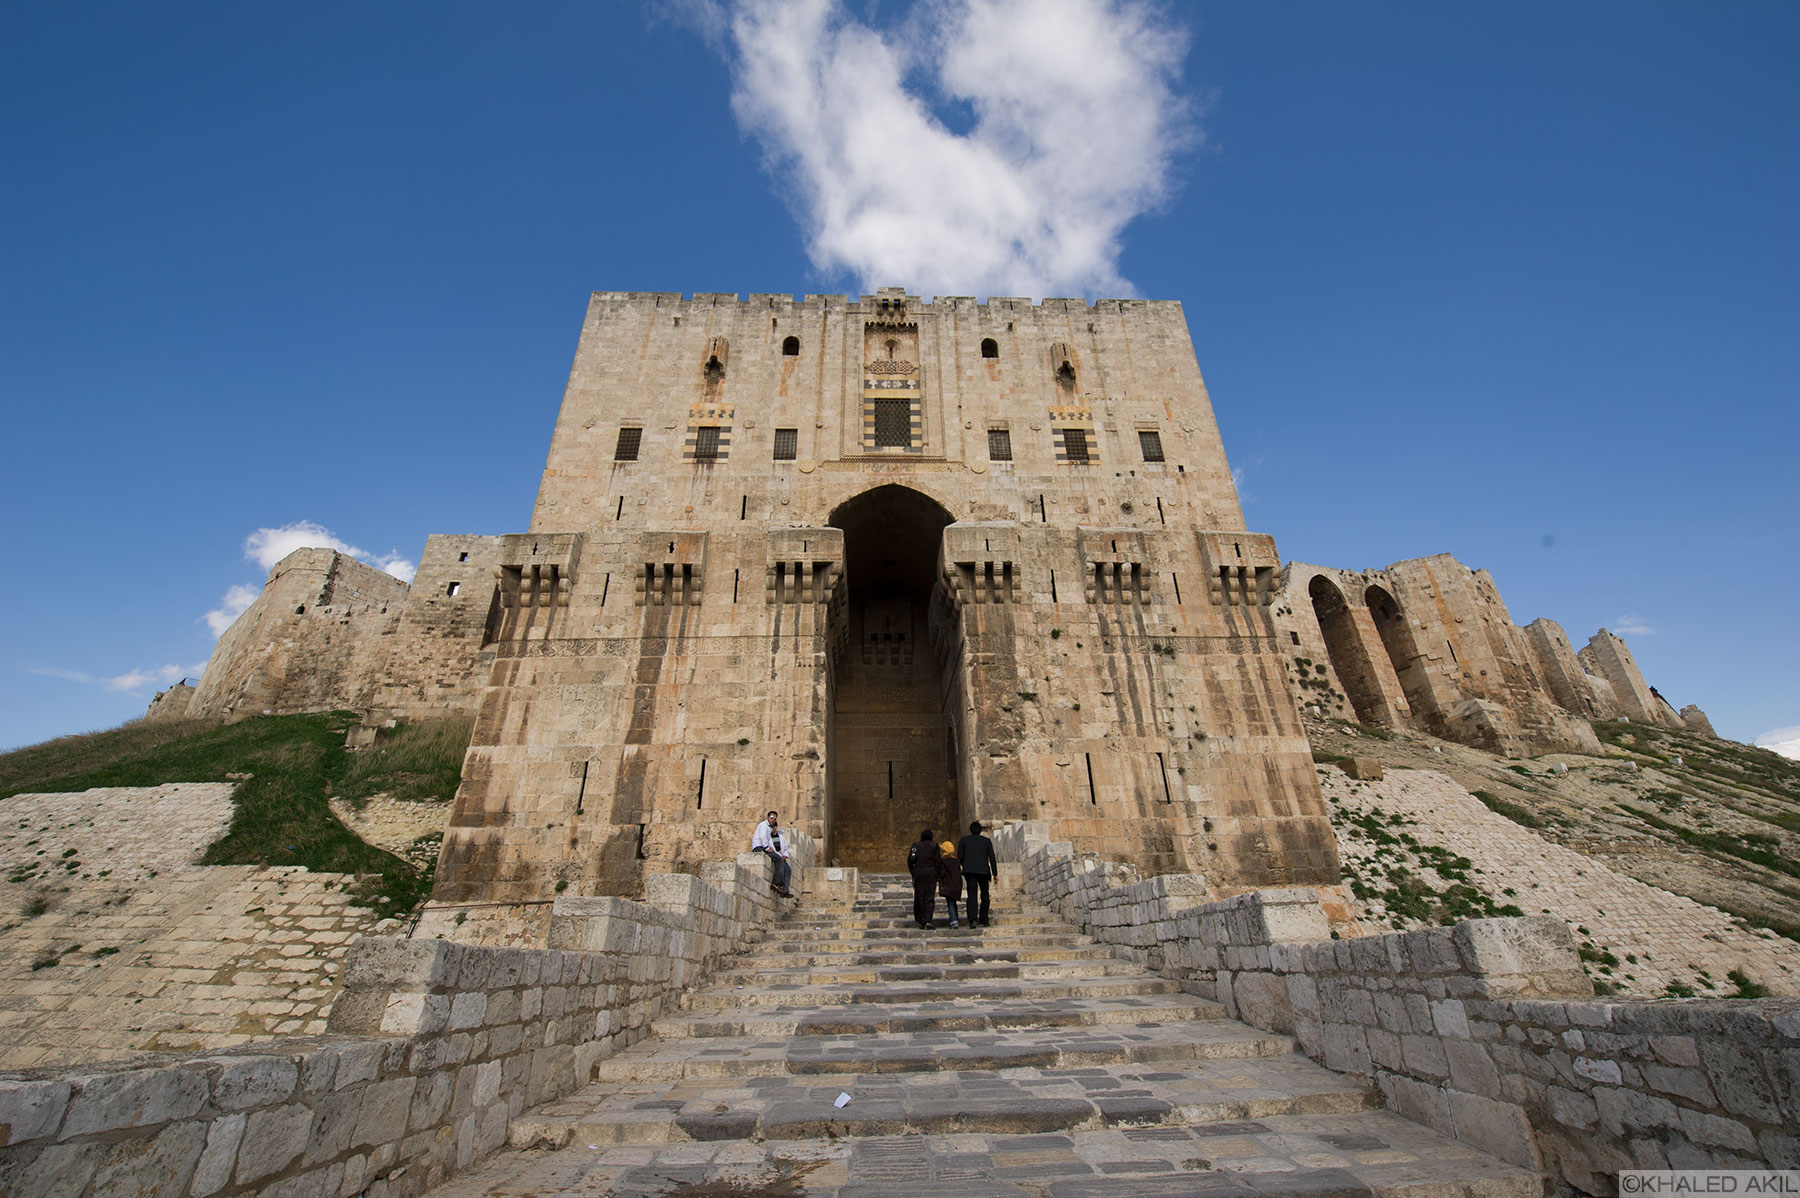  The Citadel of Aleppo is a large medieval fortified palace in the centre of the old city of Aleppo, northern Syria. It is considered to be one of the oldest and largest castles in the world. 